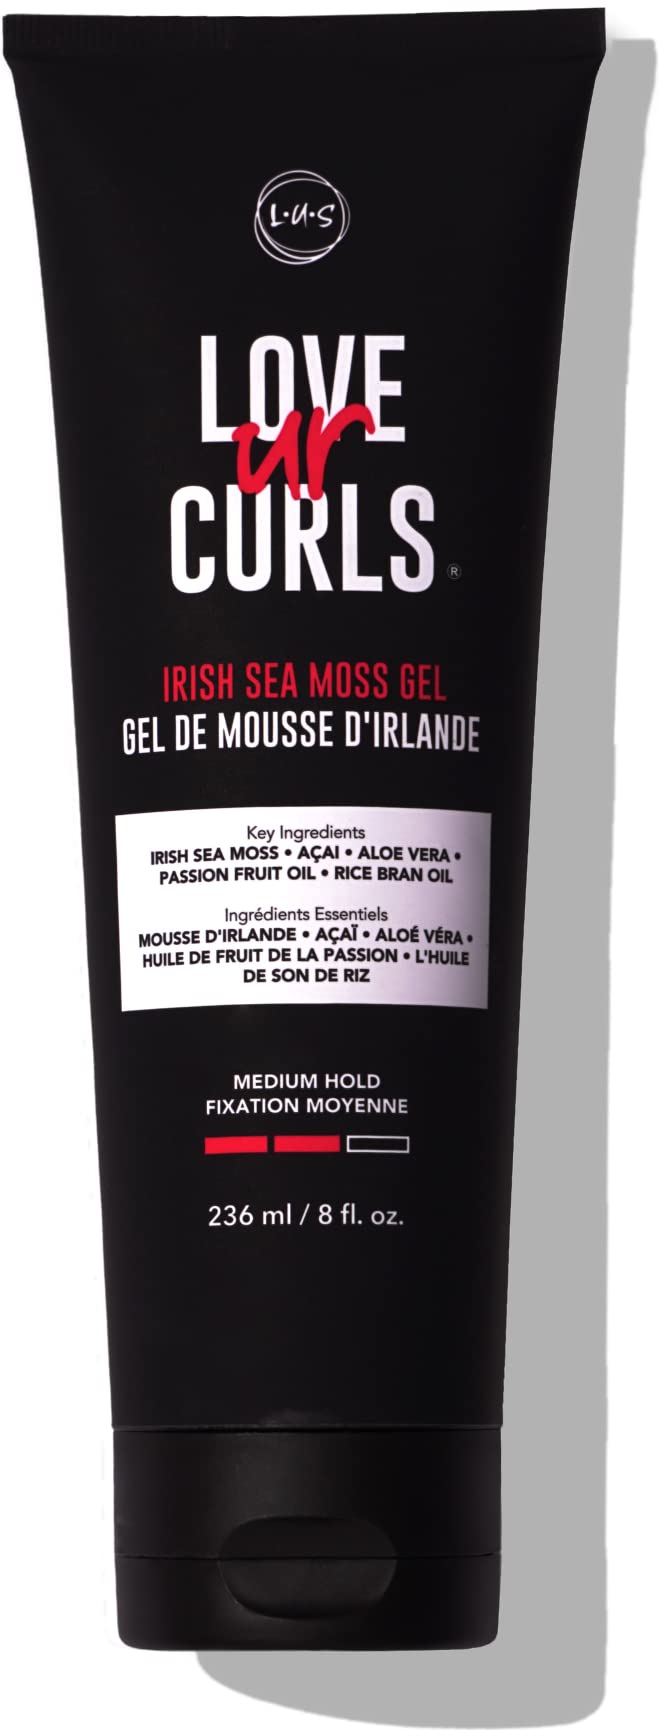 Love Ur Curls LUS Brands Irish Sea Moss gel for Hydrated, Defined Waves & coils: curl-Activating, Medium-Hold Styling gel, Acai, and Passion F